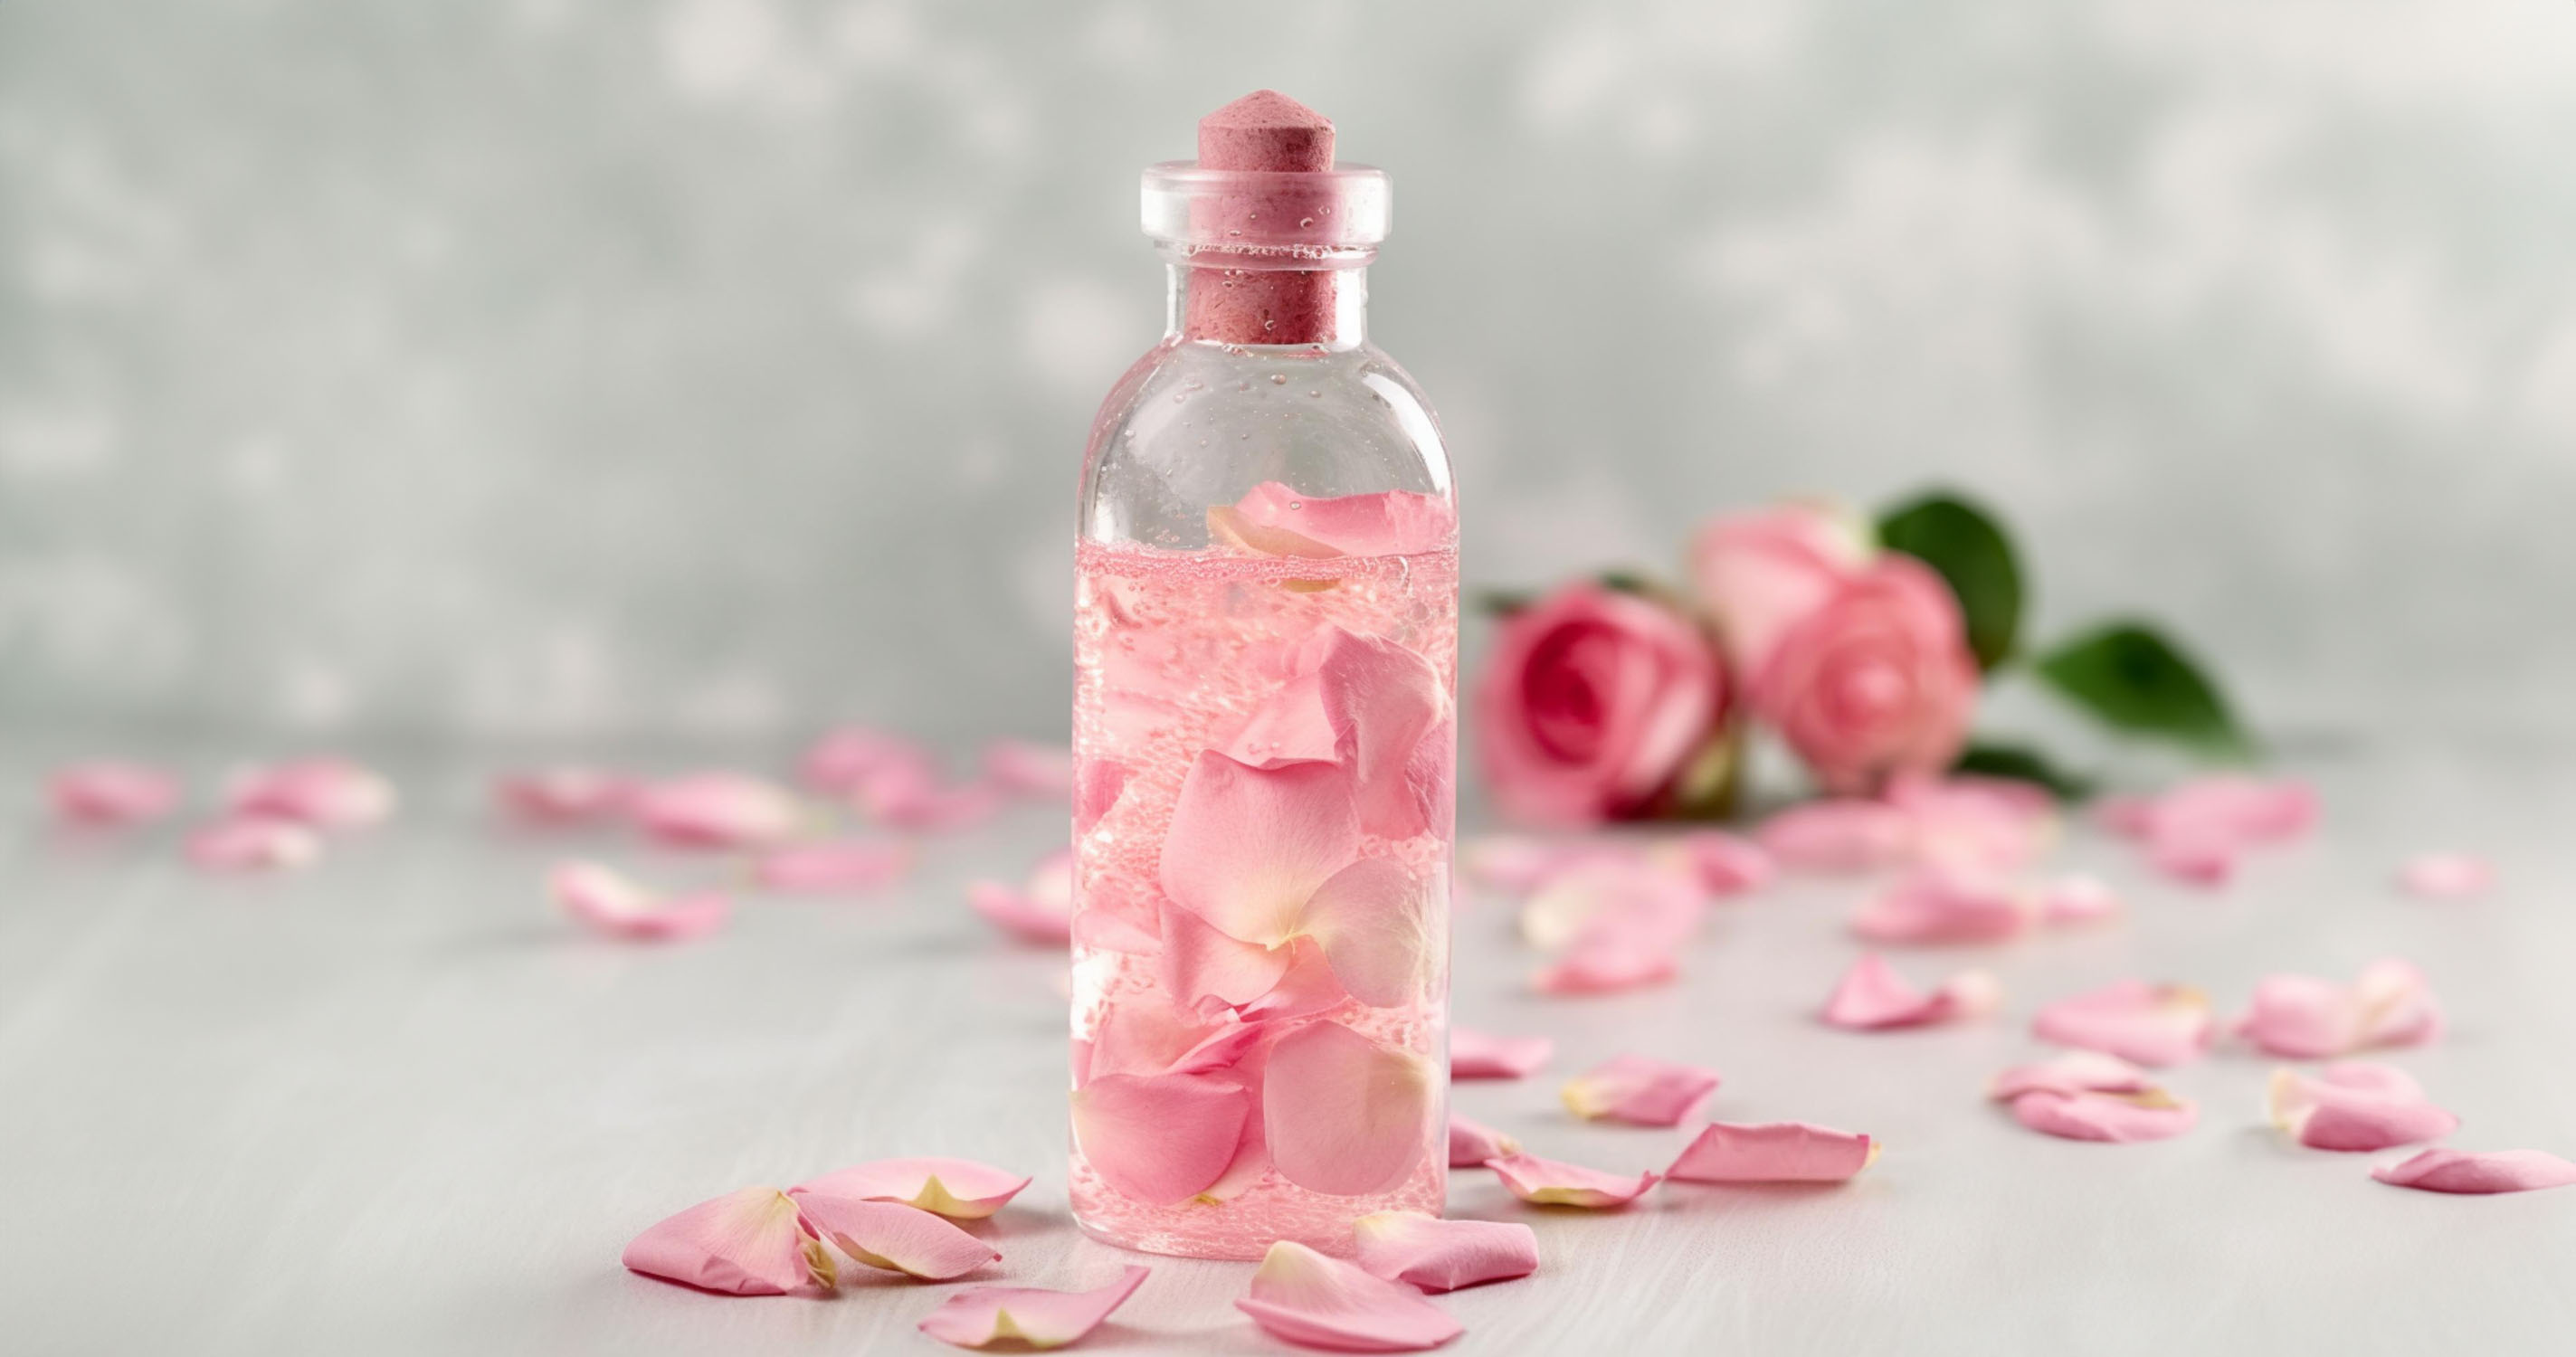 Transparent bottle of natural rosewater with fresh rose petals.